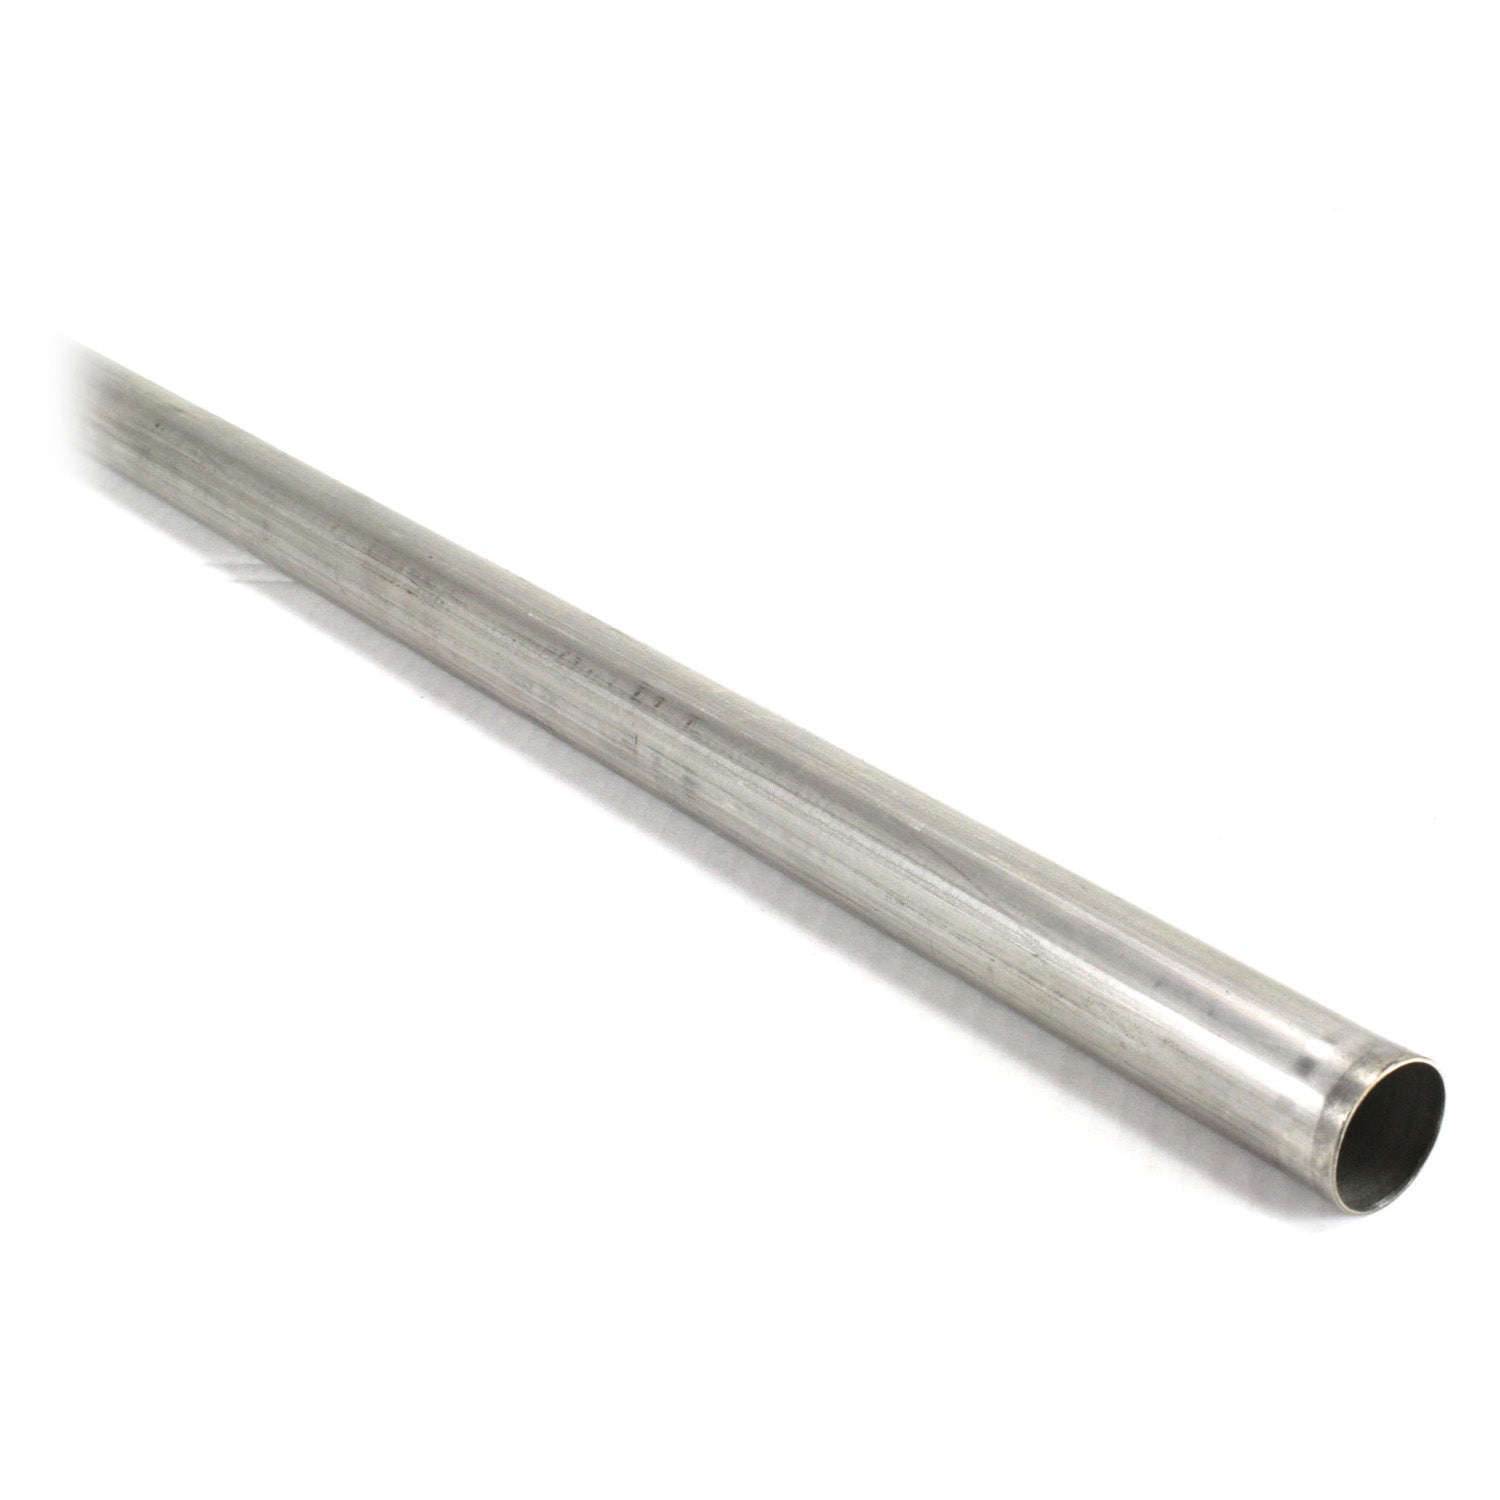 Patriot Exhaust H7701 Tubing 304 Stainless Steel 1 3/8"